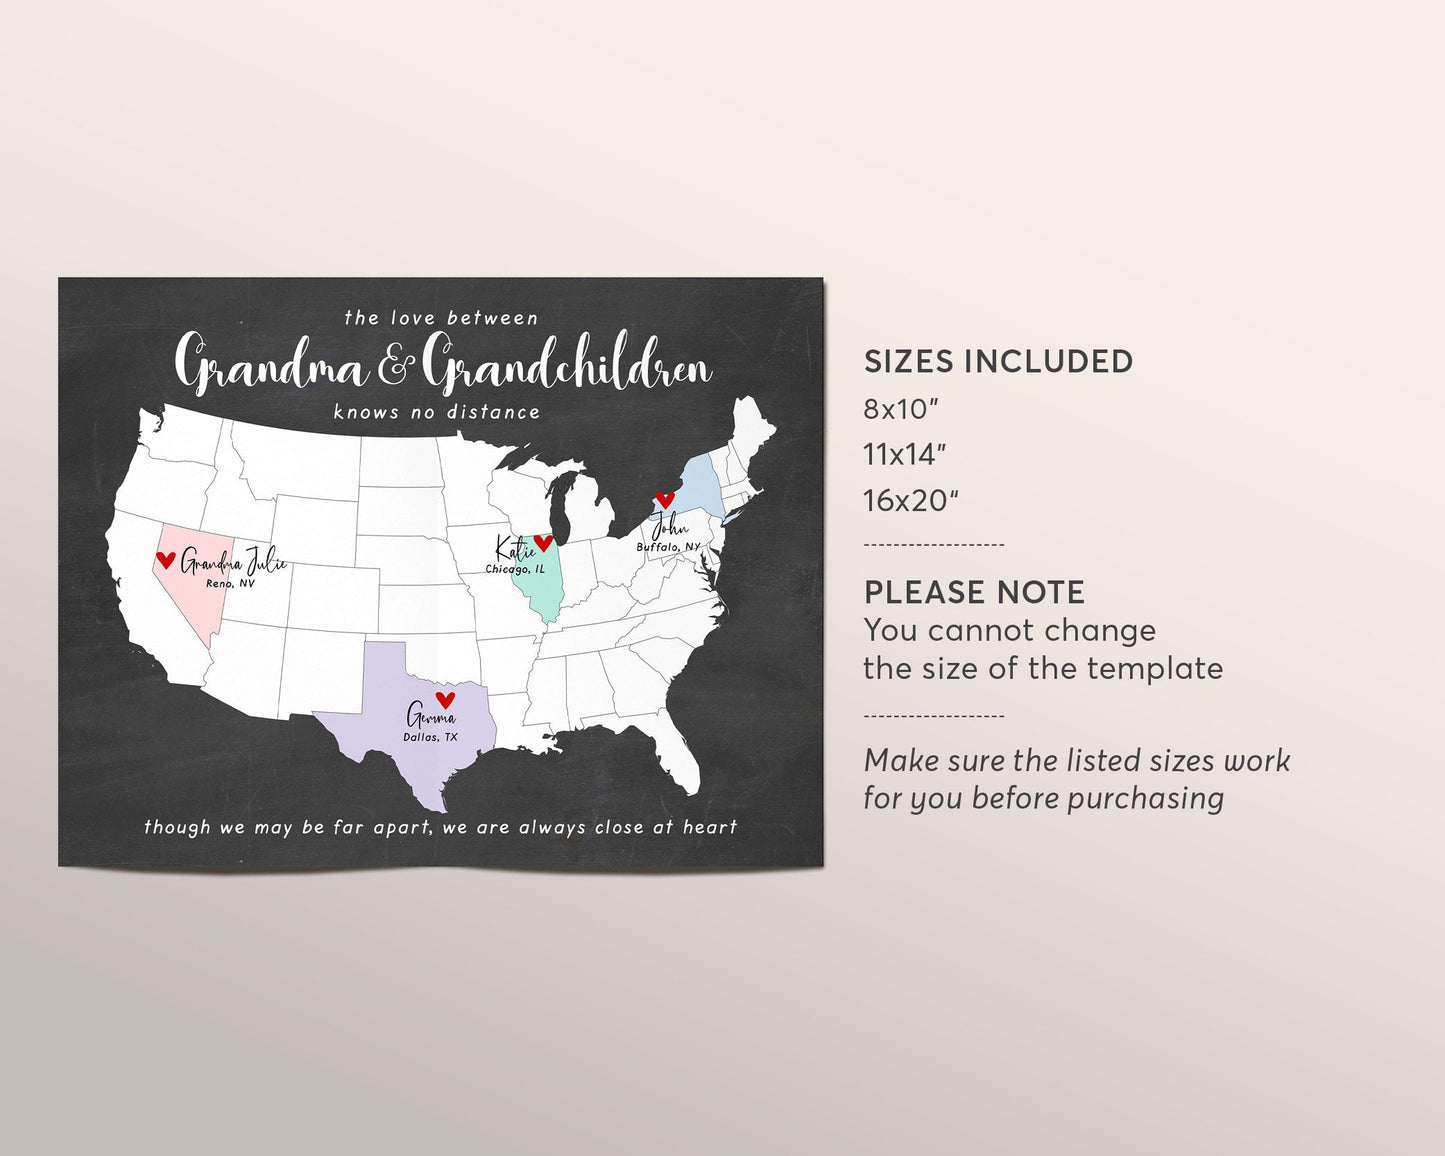 Editable Long Distance Grandma Gift Template, Mother's Day Gift for Grandpa, Gift from Grandkids Grandchildren to Grandmother Grandparents